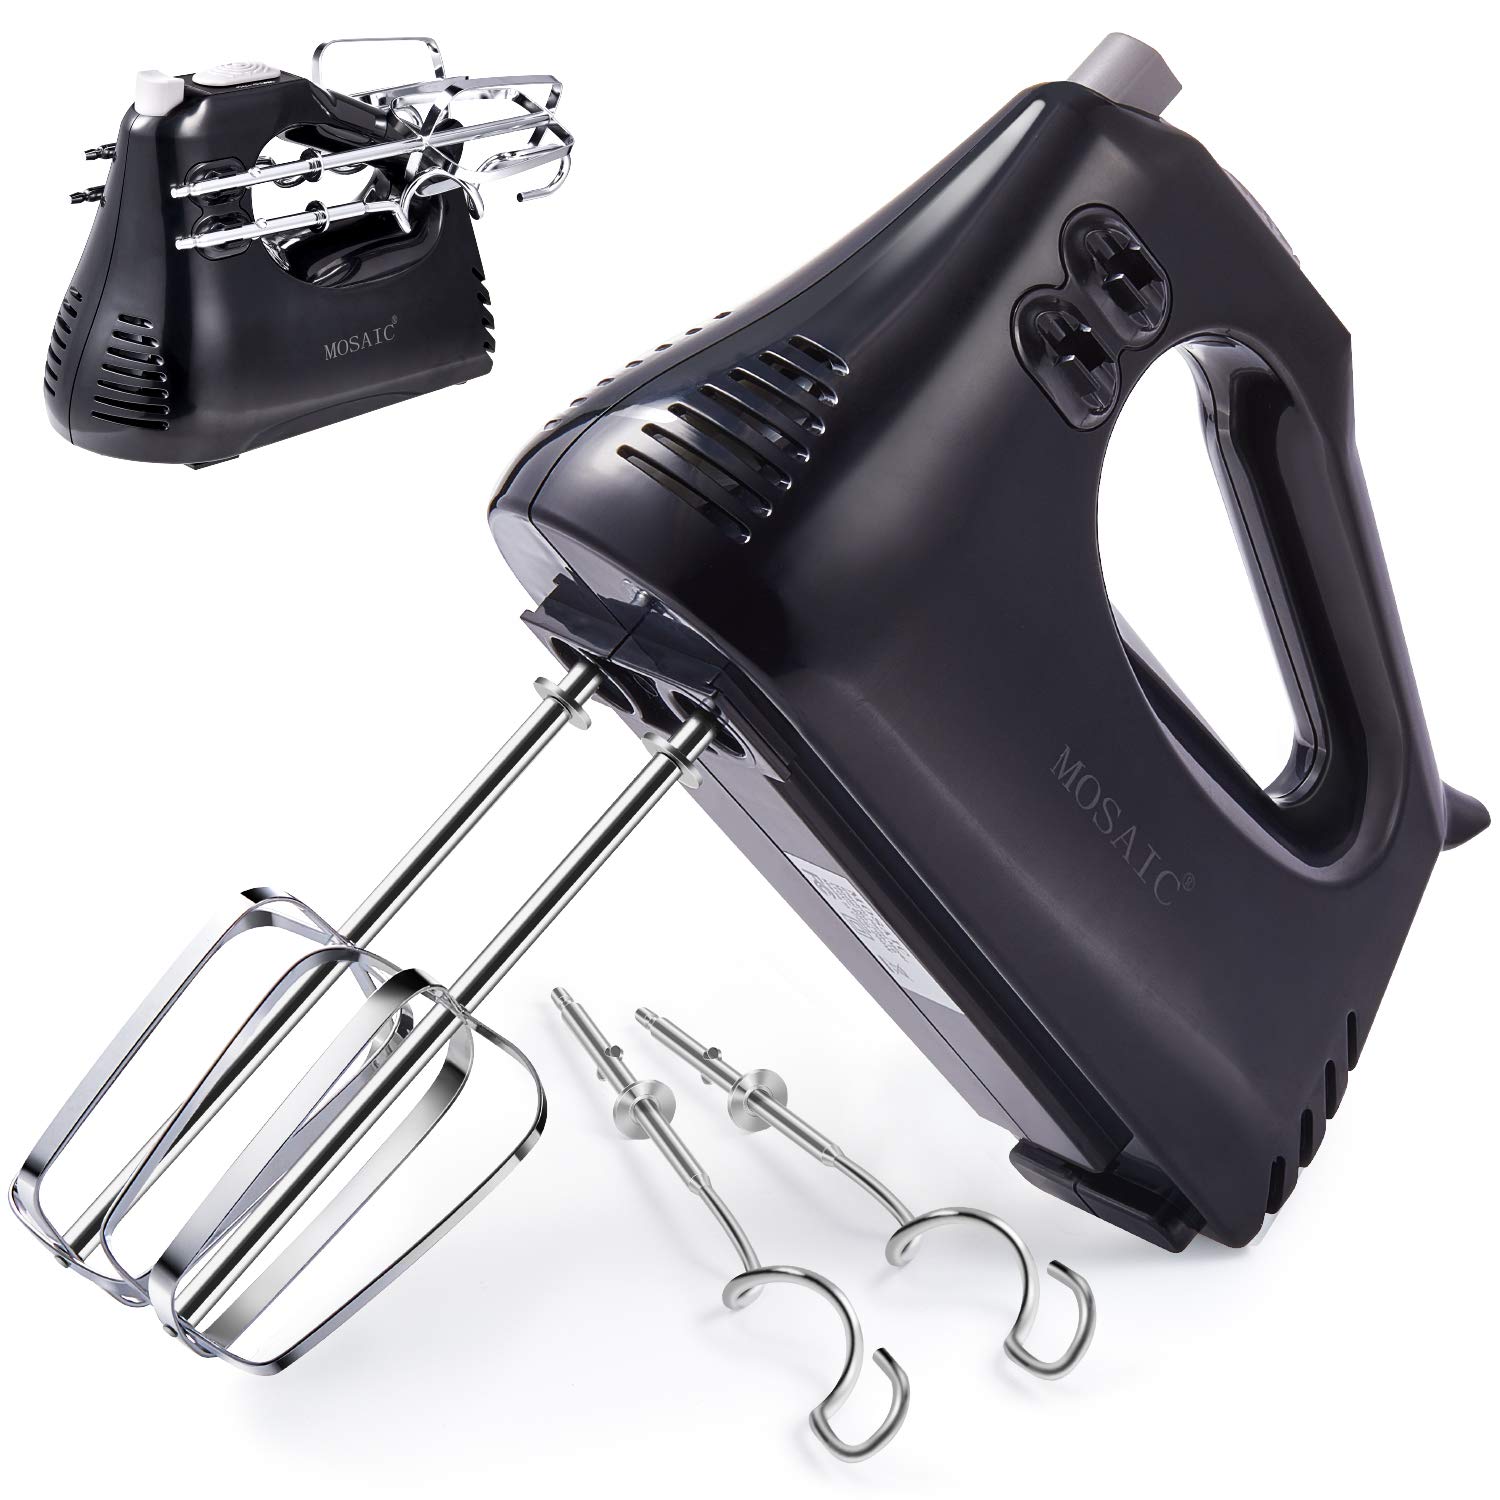 Hand Mixer- LHBD Cordless Electric Whisk Portable Handheld Electric Mixer  with 3-Speed Self-Control, 304 Stainless Steel Beaters & Balloon Whisk, for  Whipping, Mixing,Pudding, Cookies, Cakes, Batters : Amazon.co.uk: Home &  Kitchen